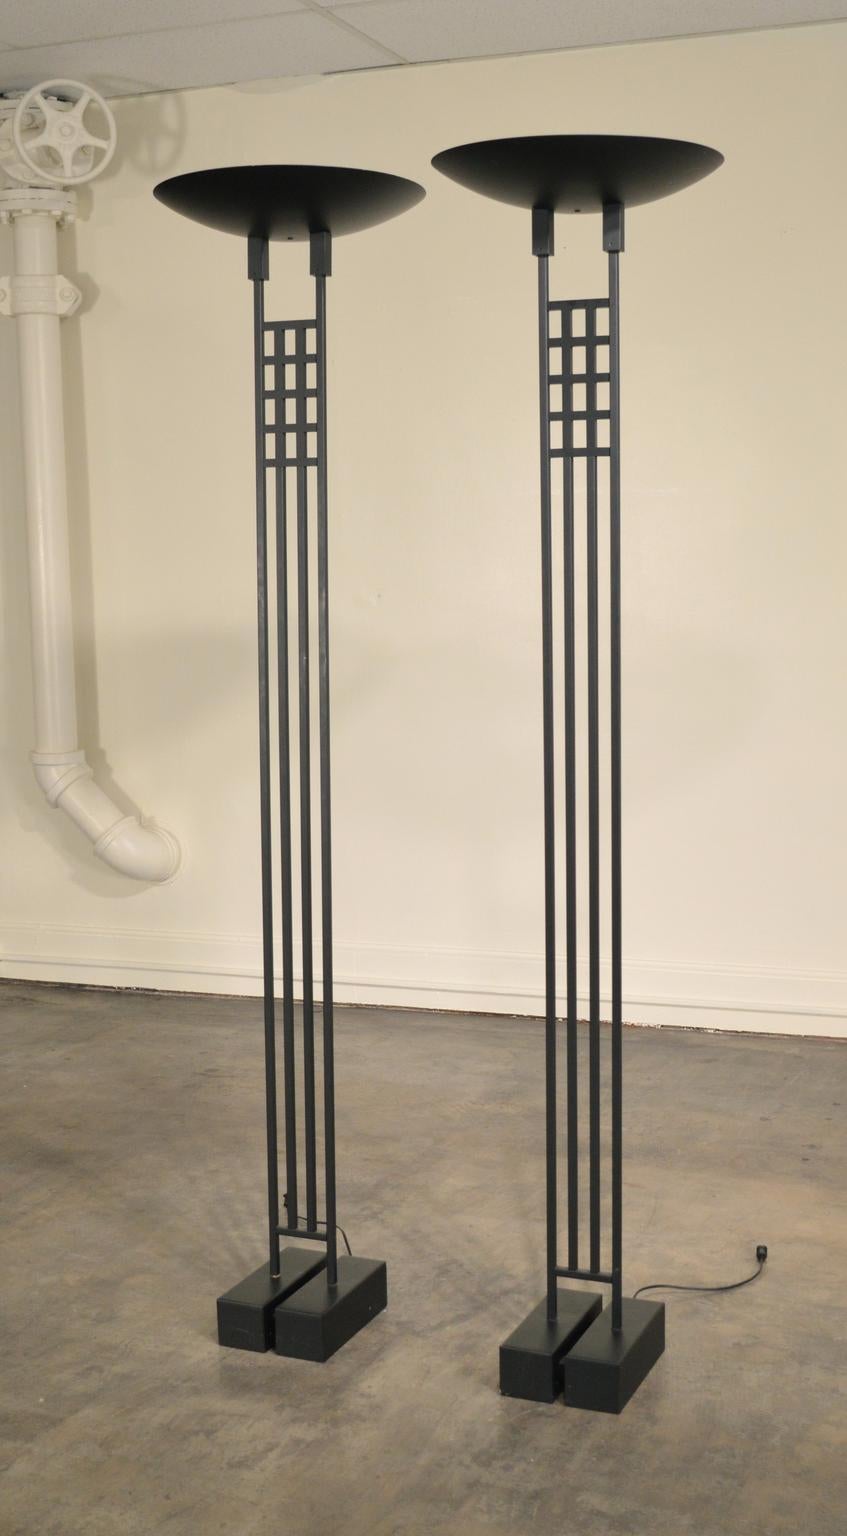 A  tall pair of black metal halogen Post-Modern torchieres designed by Robert Sonneman, in the 1980's,  in the style of Scottish Architect and Designer, Charles Rennie Mackintosh. This design, with its roots in an Arts and Crafts aesthetic, would go